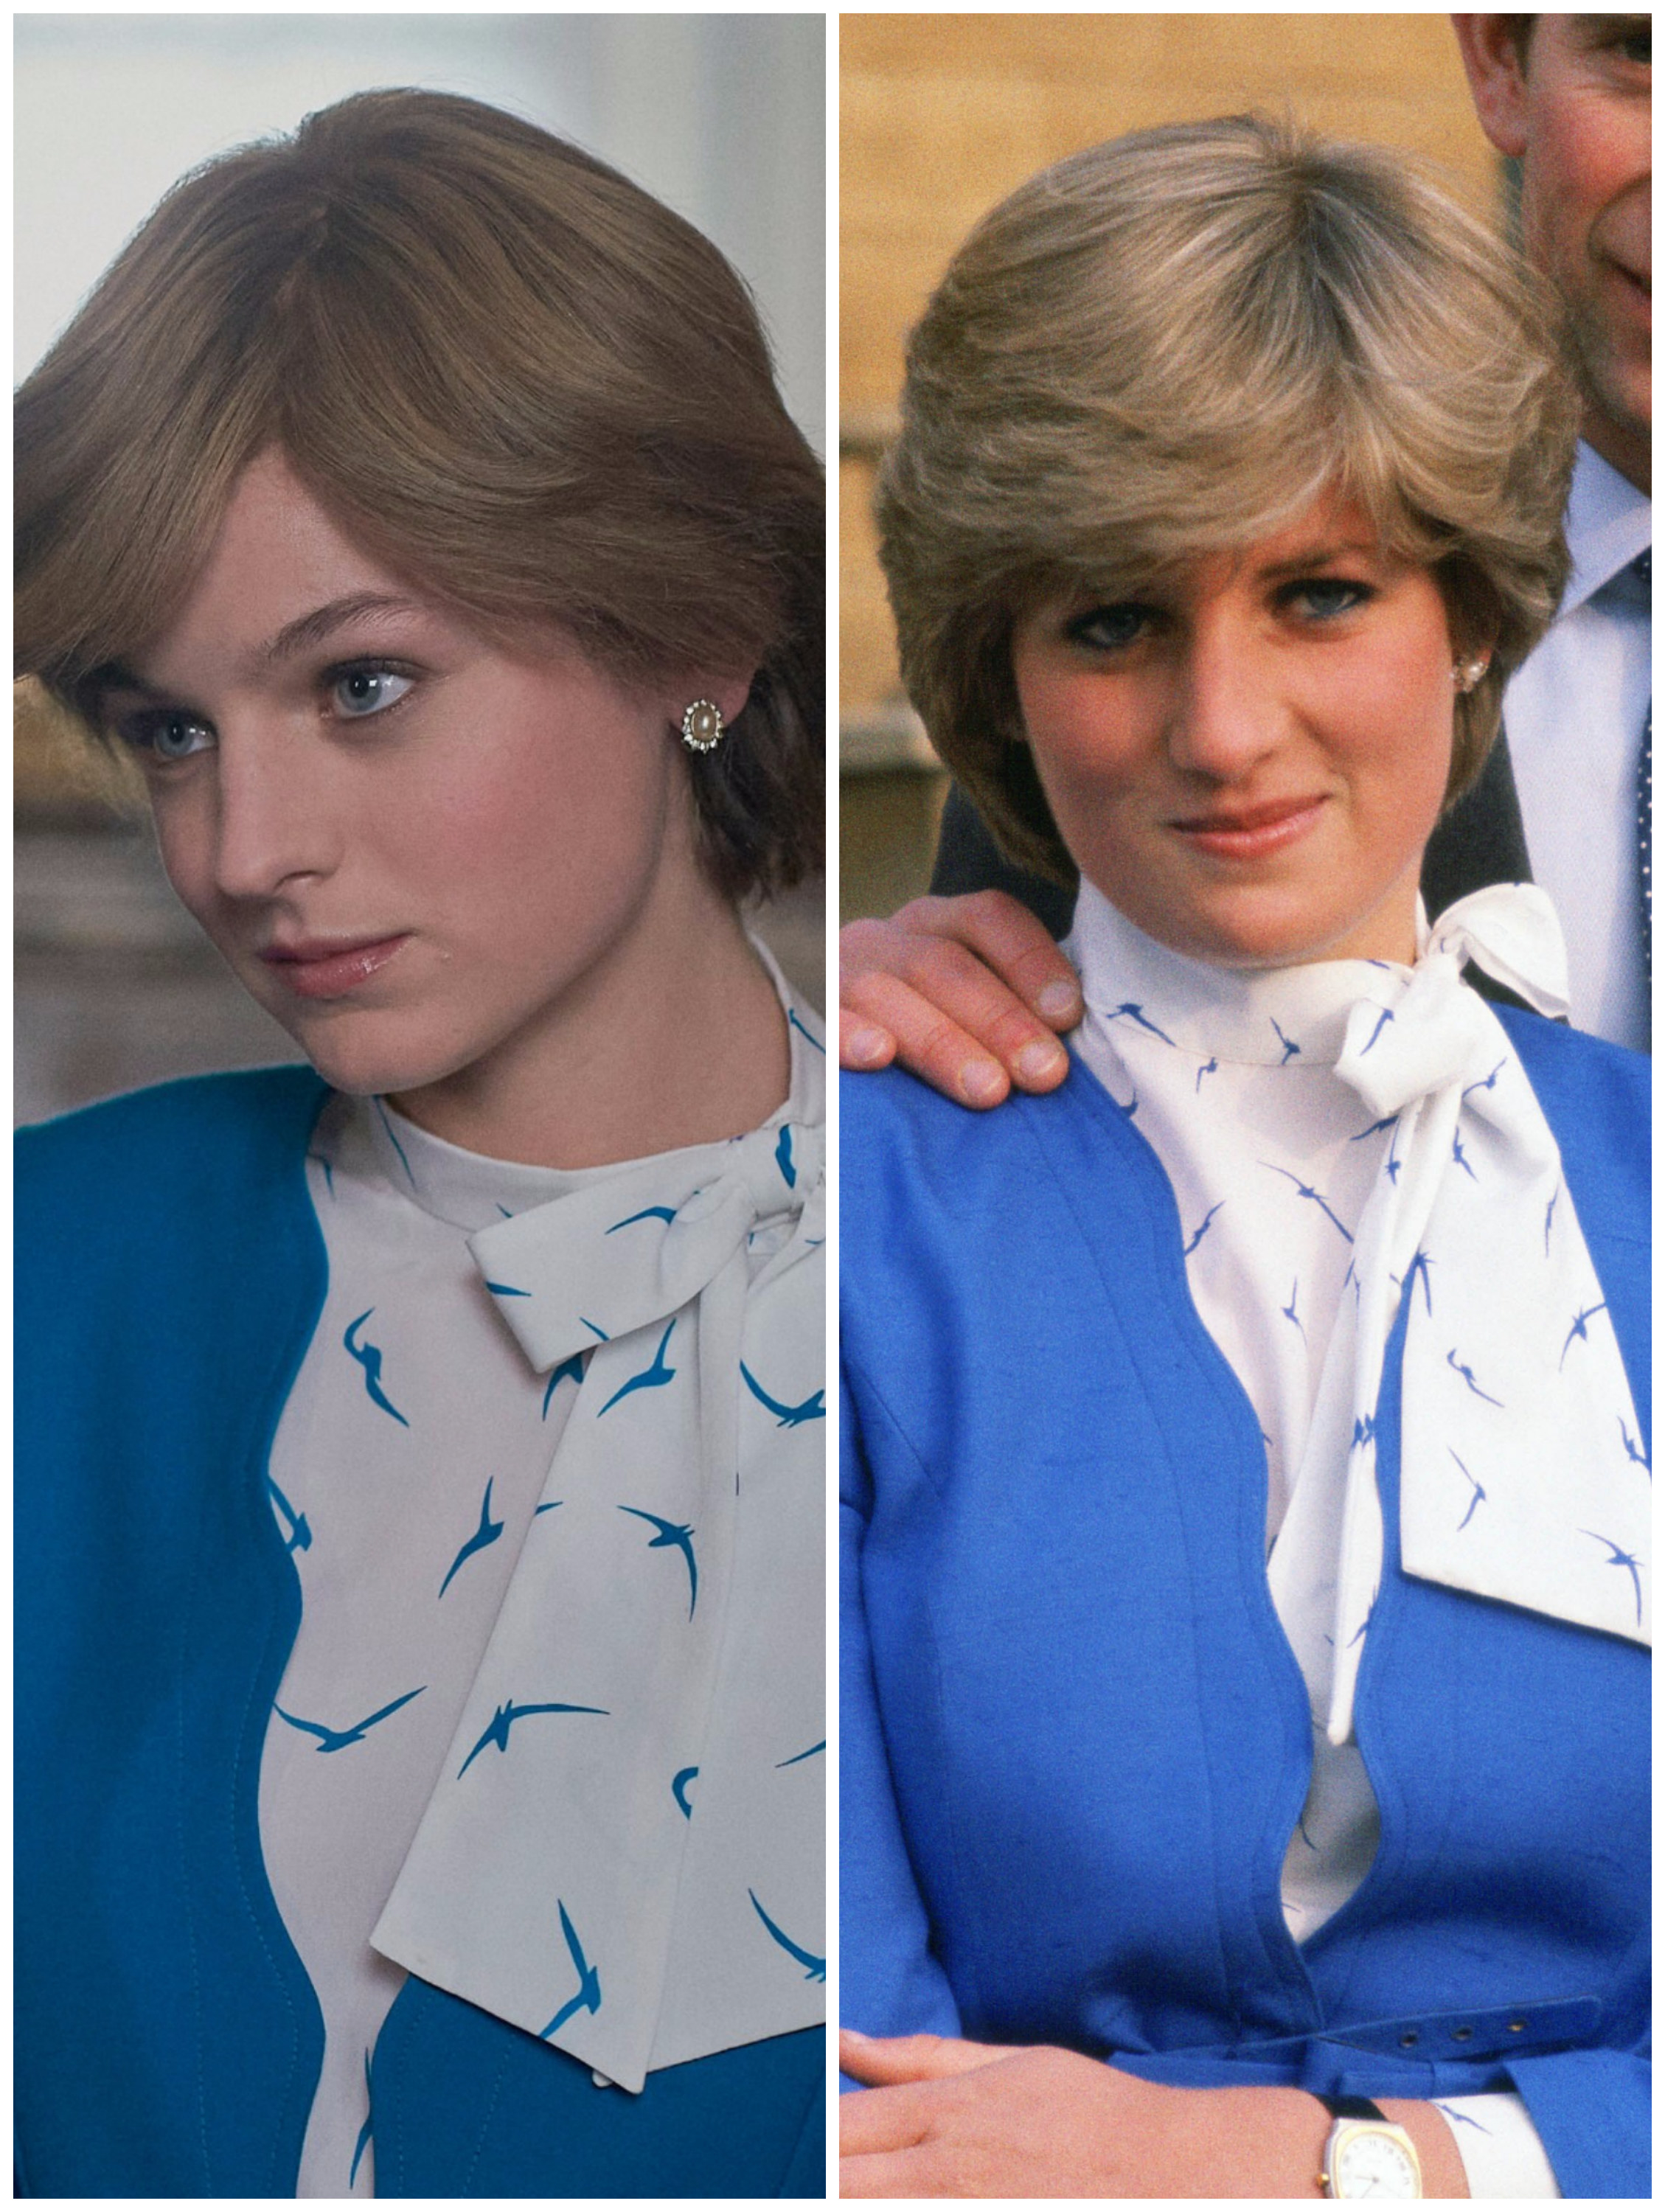 Emma Corrin in Season 4 of &quot;The Crown&quot; vs. the real Princess Diana